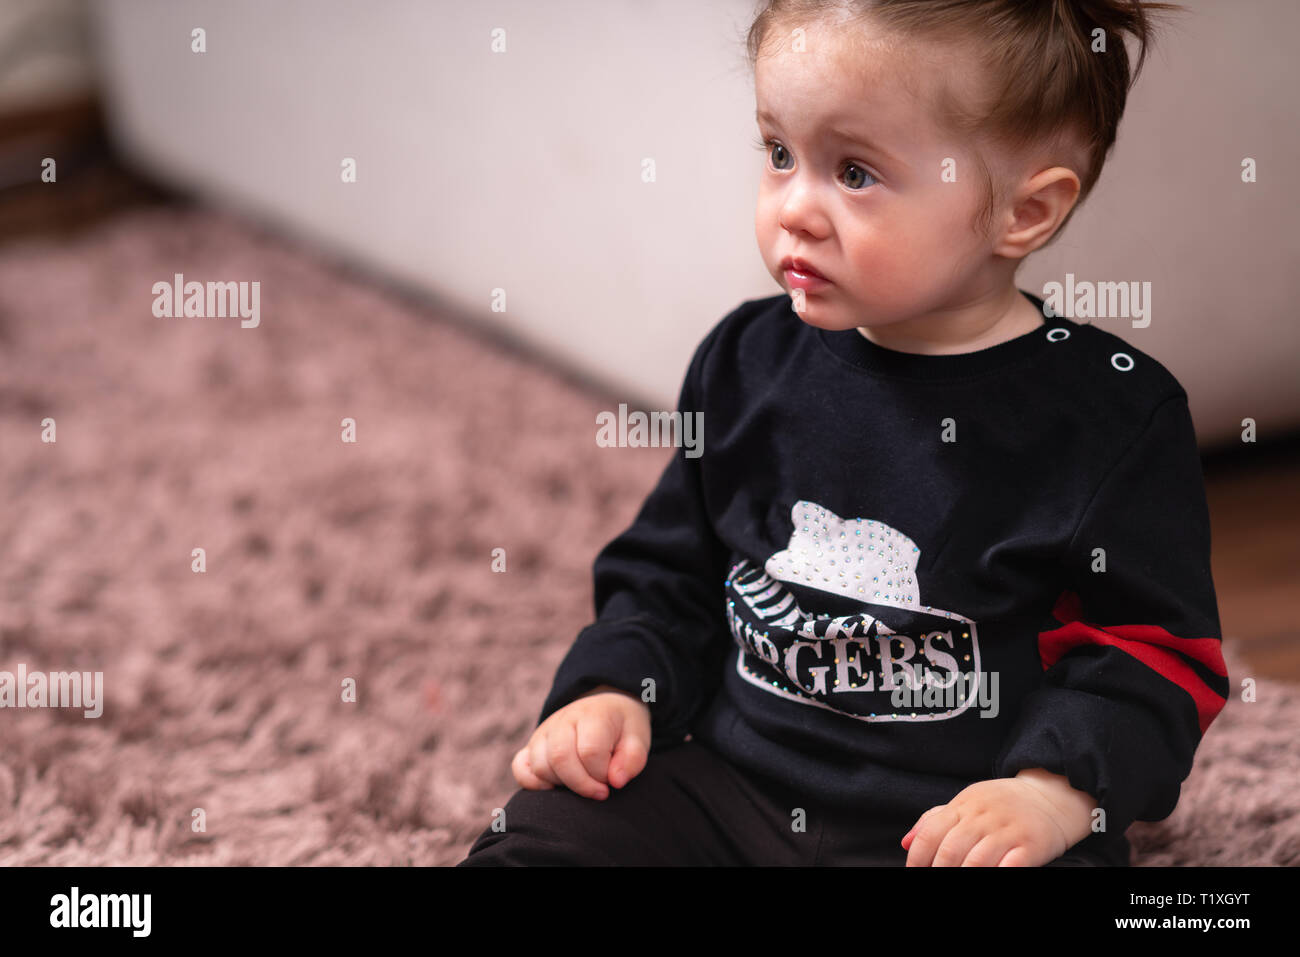 Cute little baby girl in black shirt, sitting on a carpet on floor in living room and looking away. Close-up high angle portrait with copy space Stock Photo